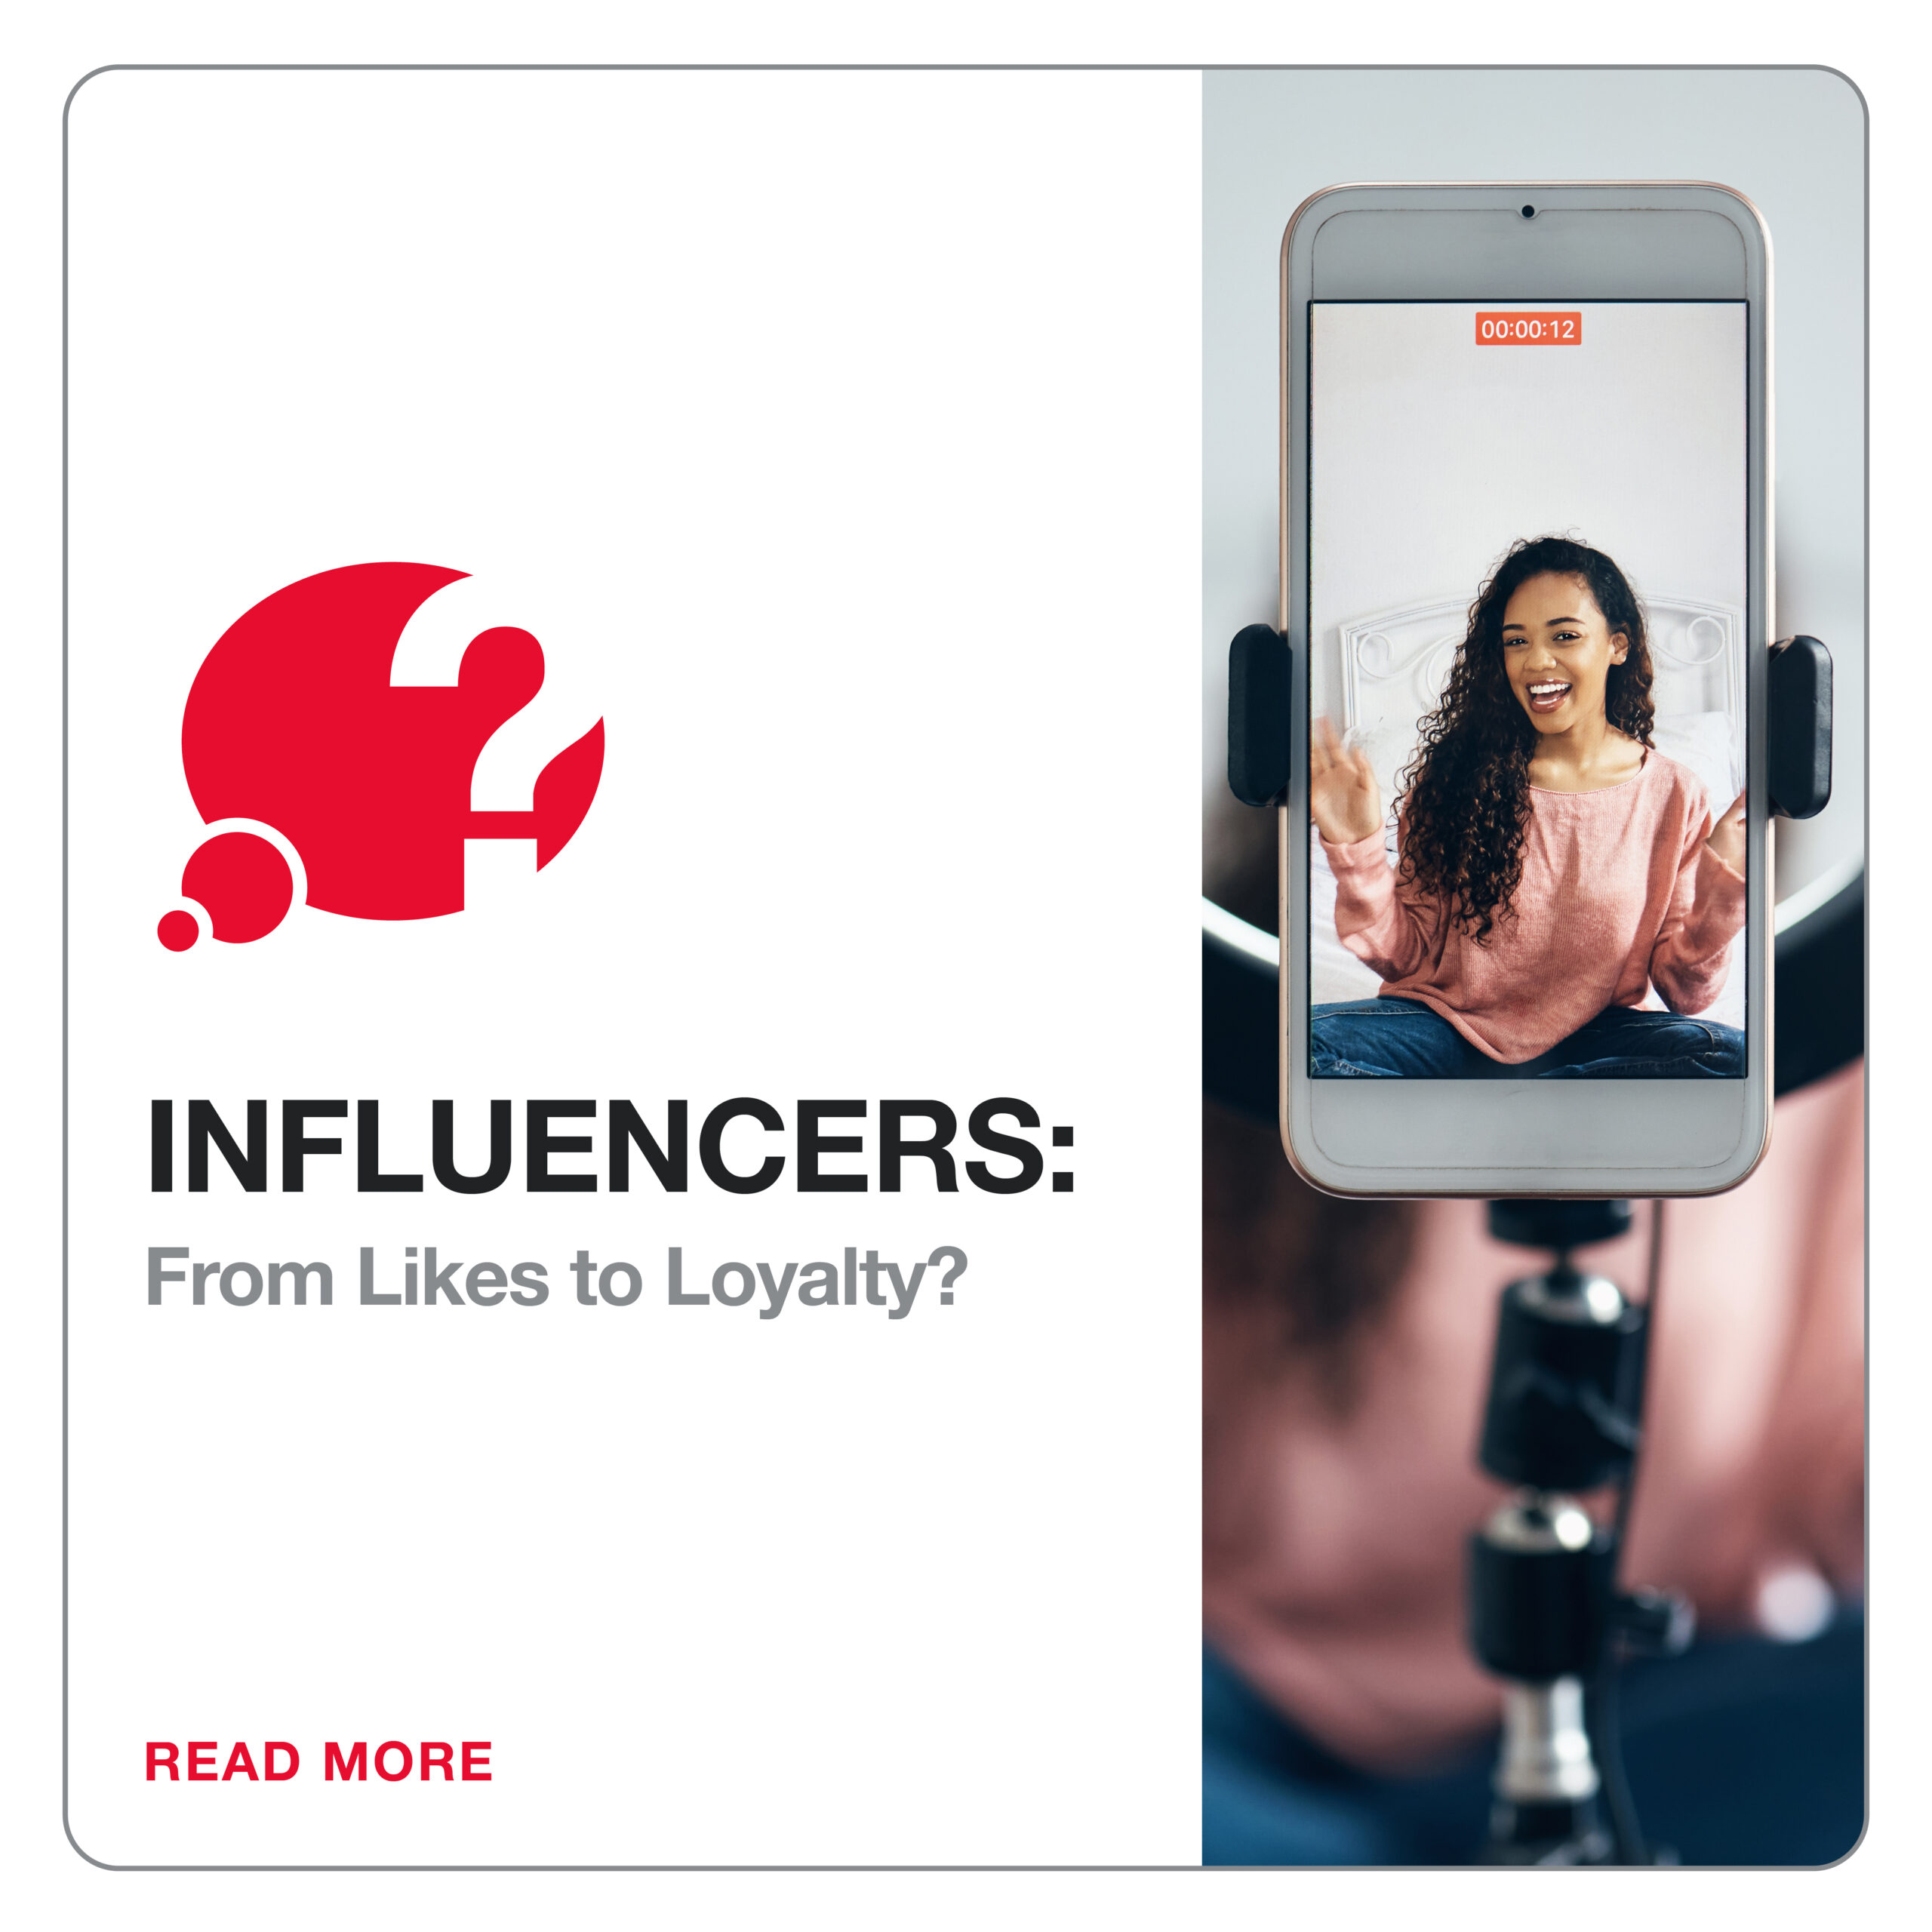 From Likes to Loyalty: The Values Behind Influencer Fandom